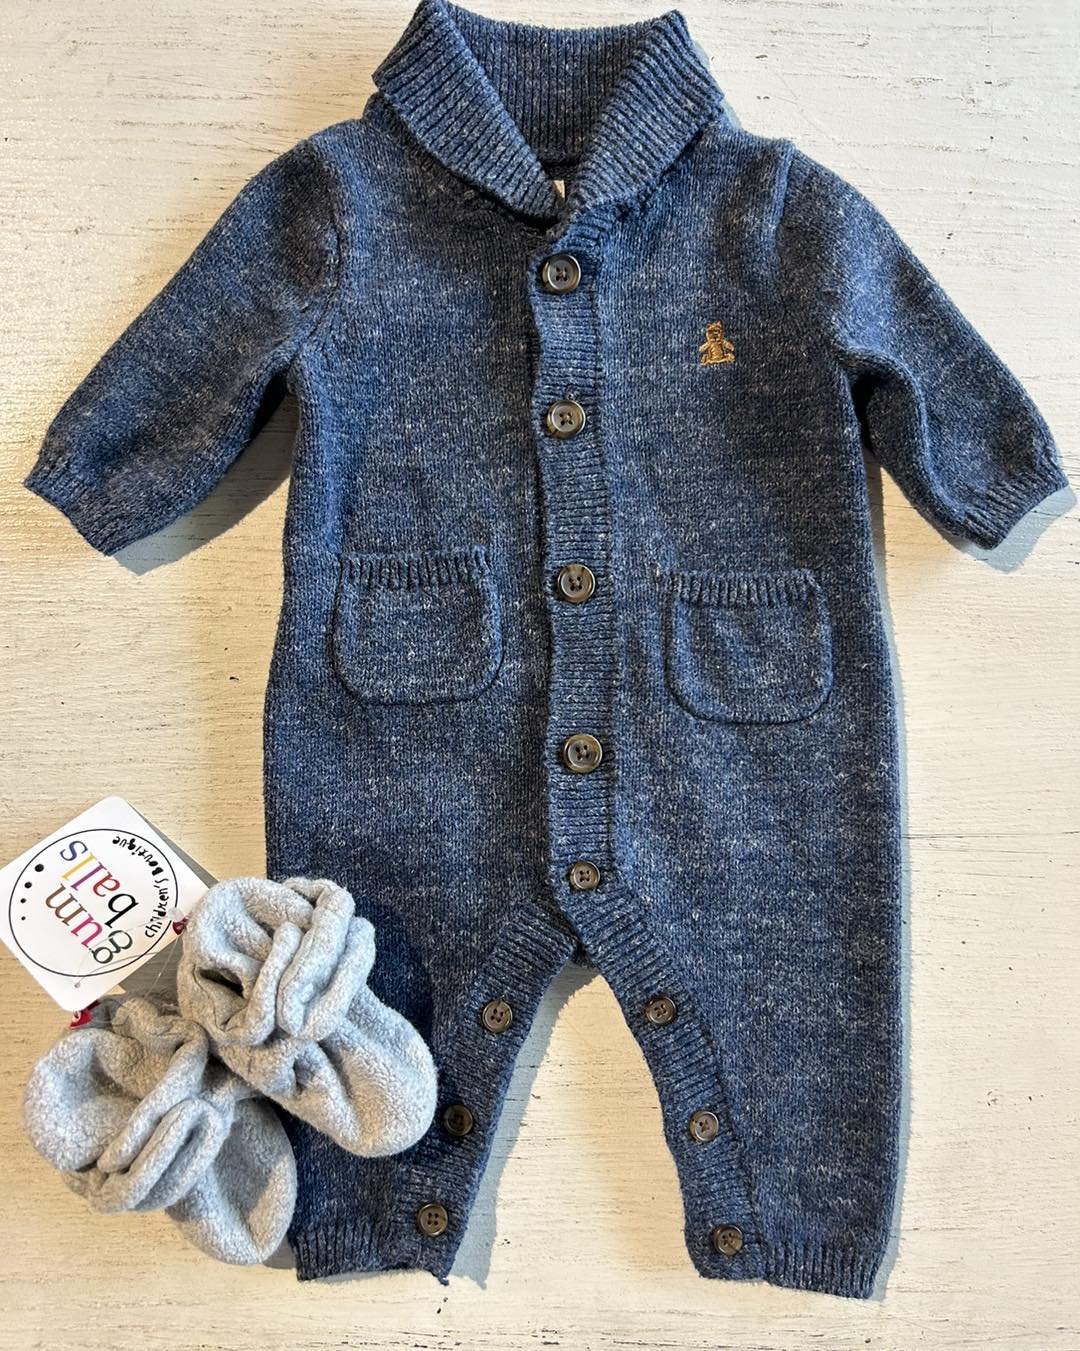 Calling all parents of fall &amp; winter babies! ❄️ We are stocking up on cool weather infant wear.  Sell us those outgrown buntings, sweaters, mittens and more! 

Anxious to shop for your fall arrival? Come shop for fall and winter infant beginning 